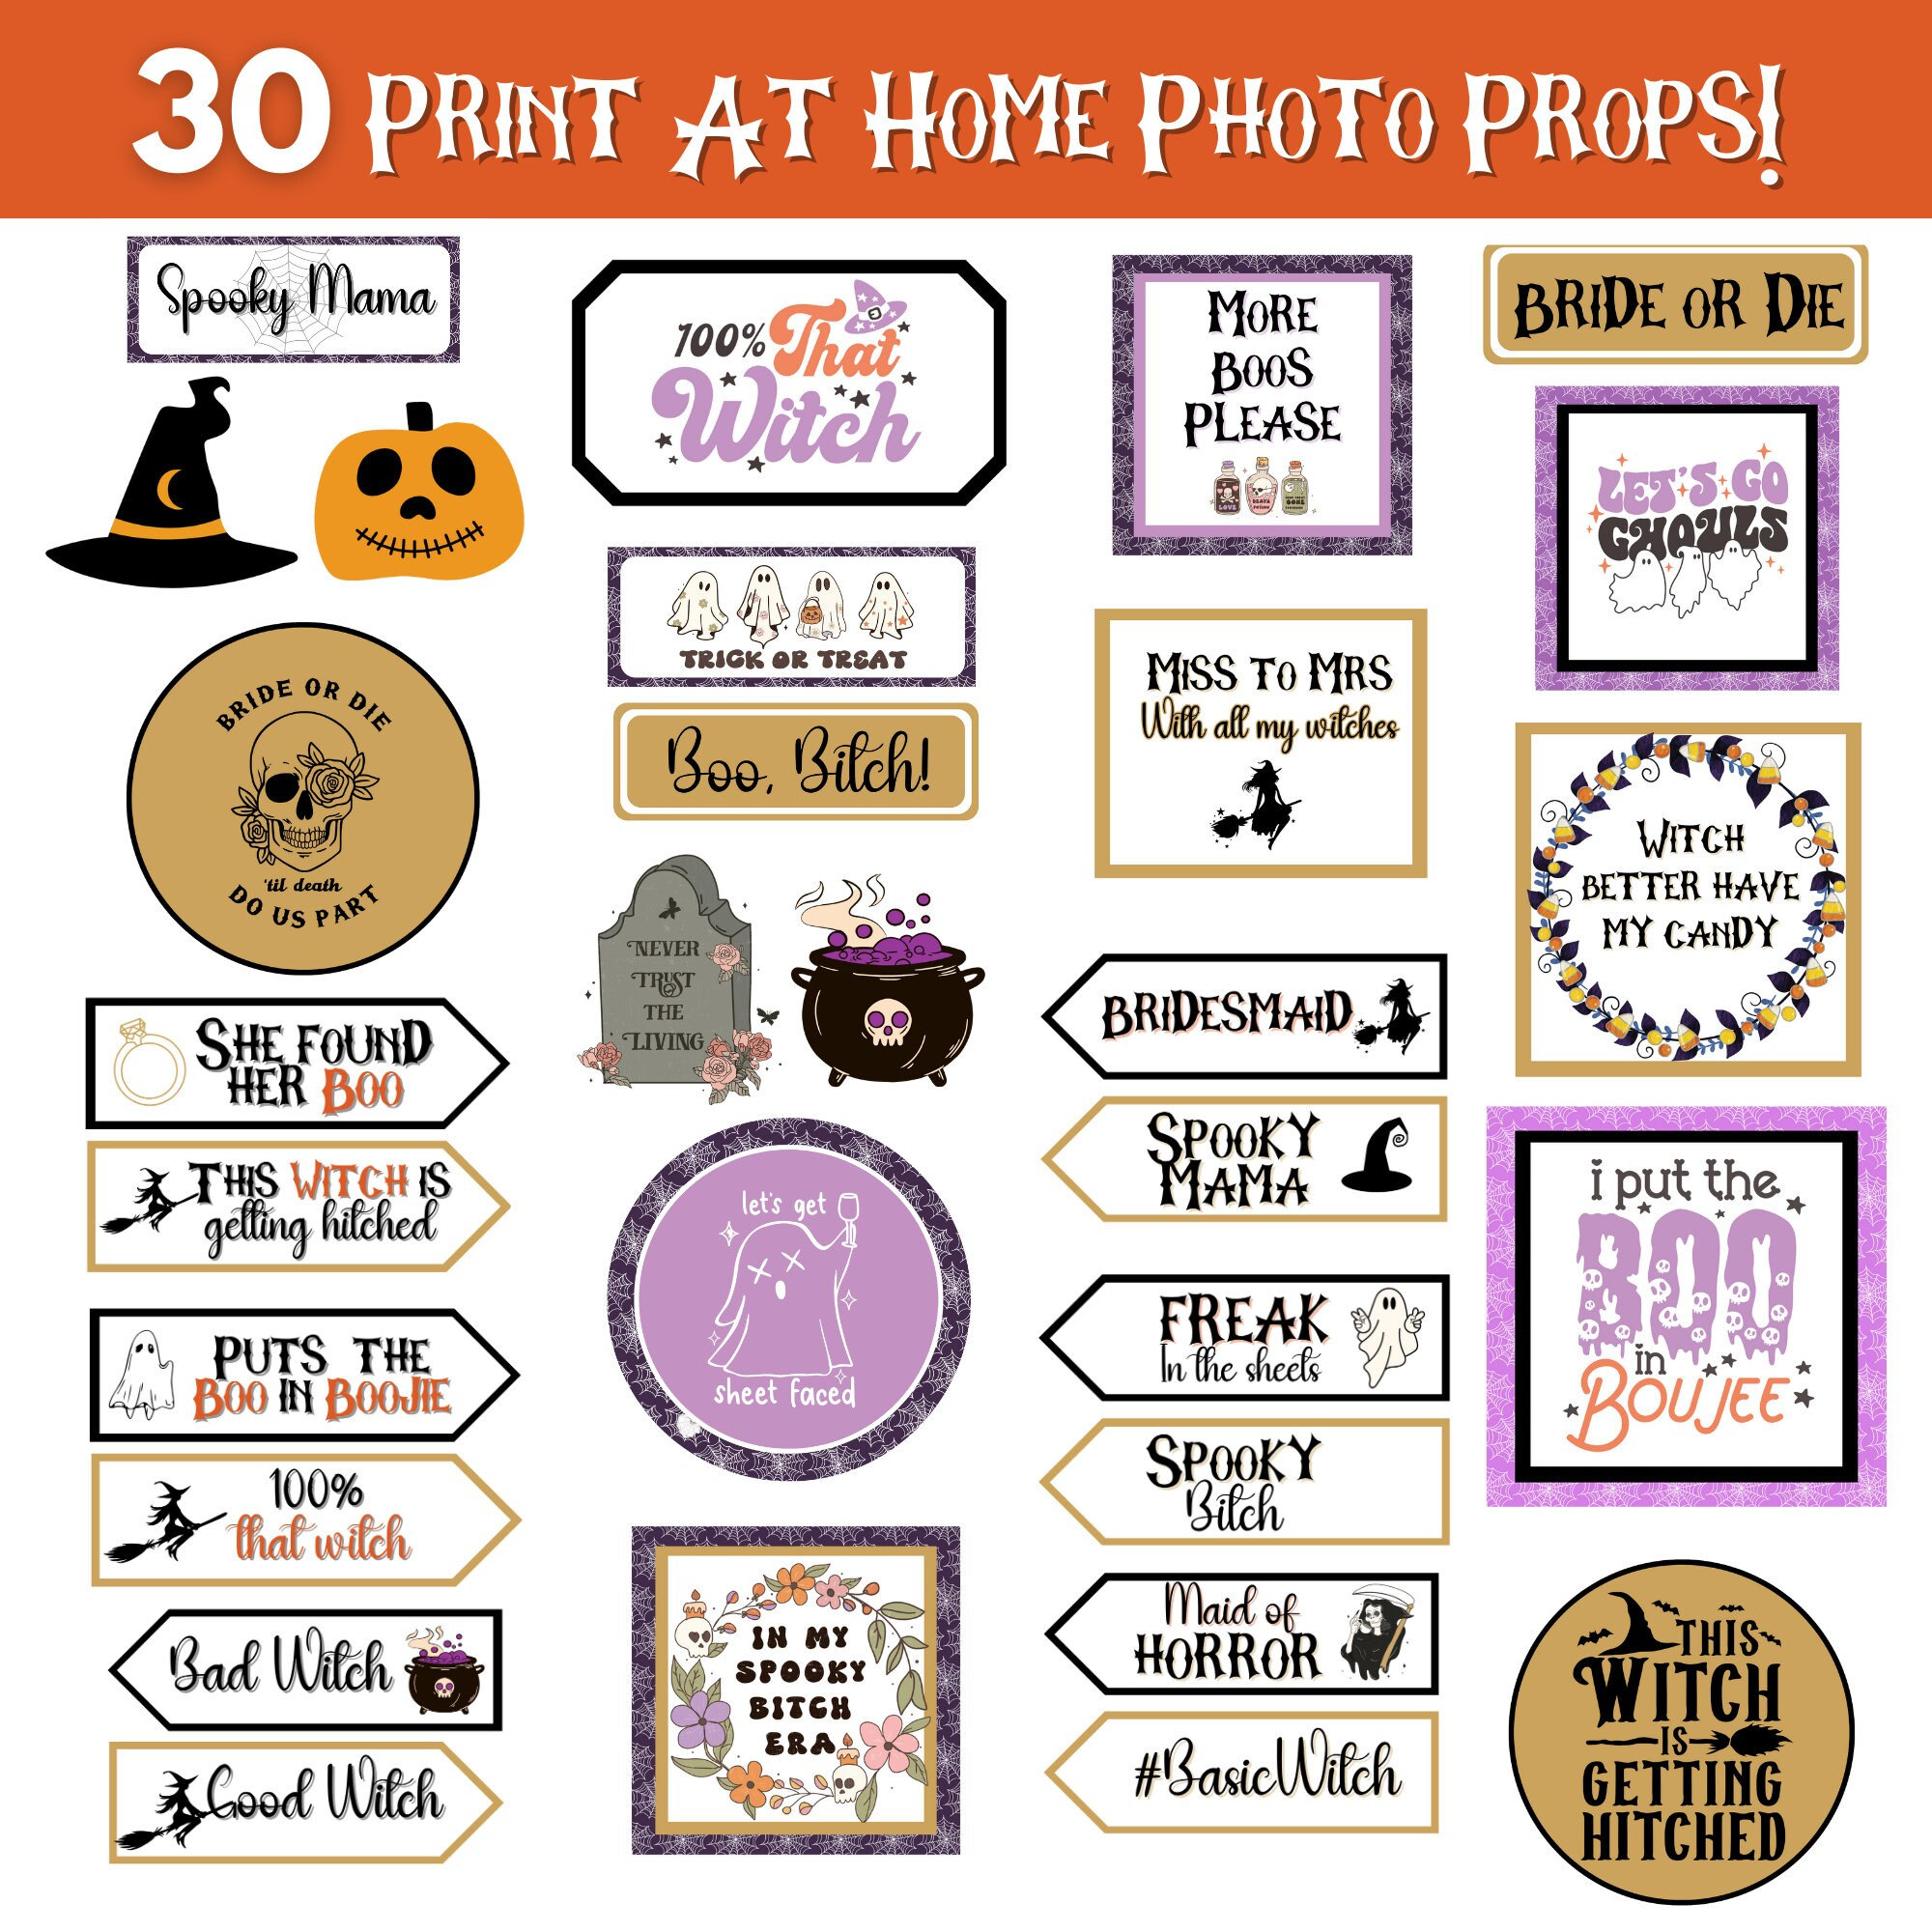 Witch and Wizard Birthday Party Photo Booth Props Instant Digital Download  DIY Printable 